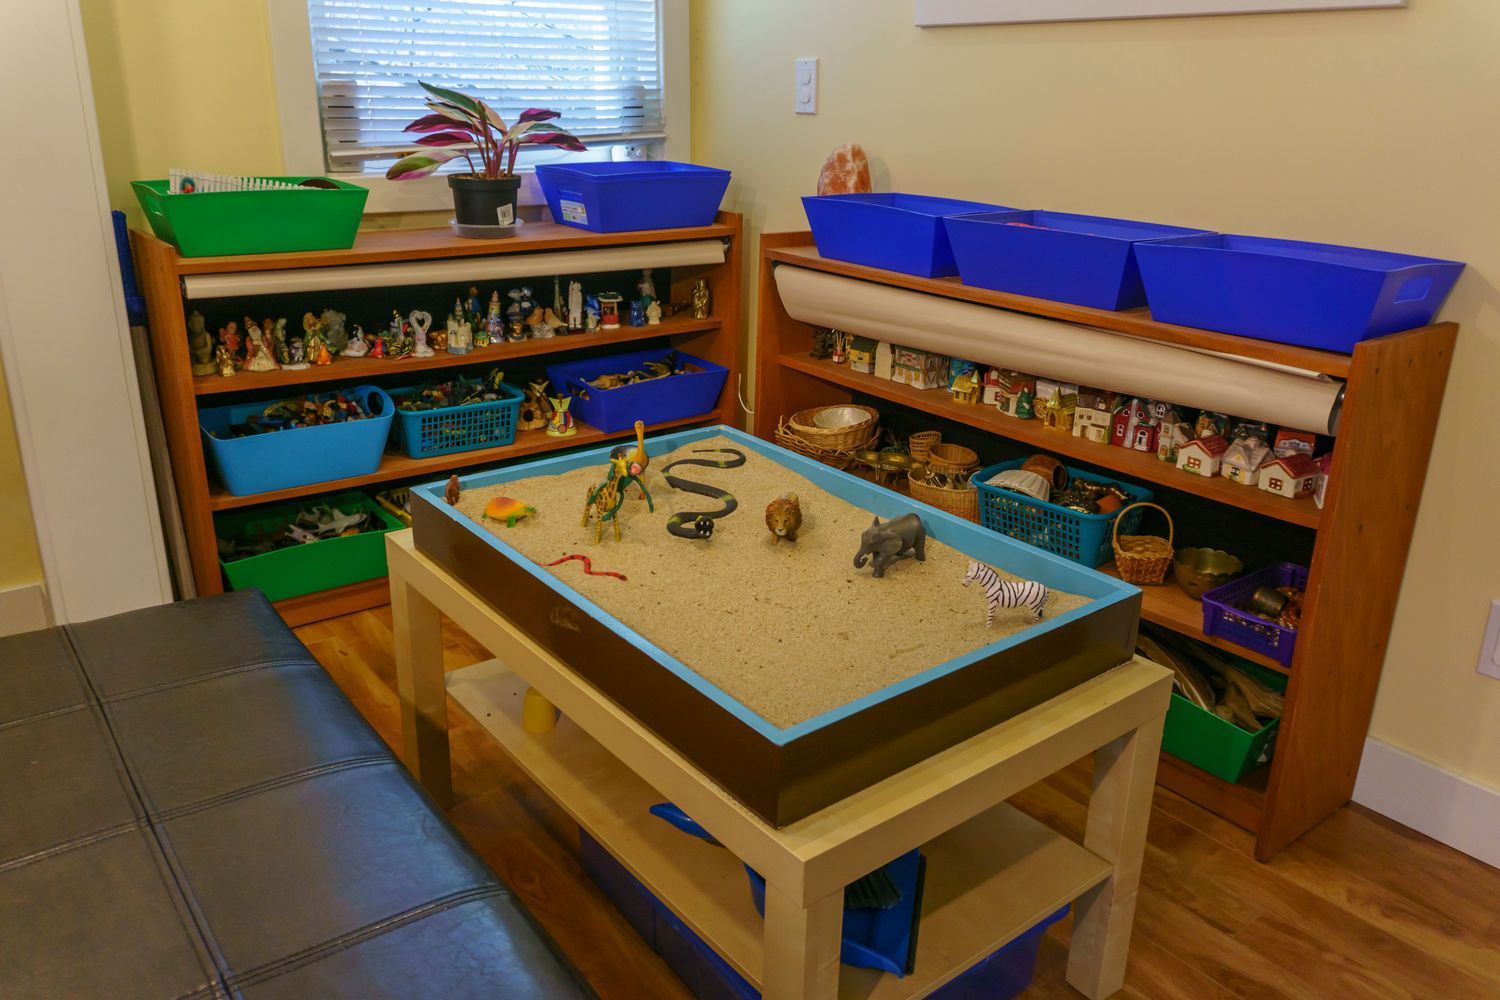 Gallery Photo of a full size sand tray with many figurines, tools and items to facilitate imaginary landscapes and inner worlds